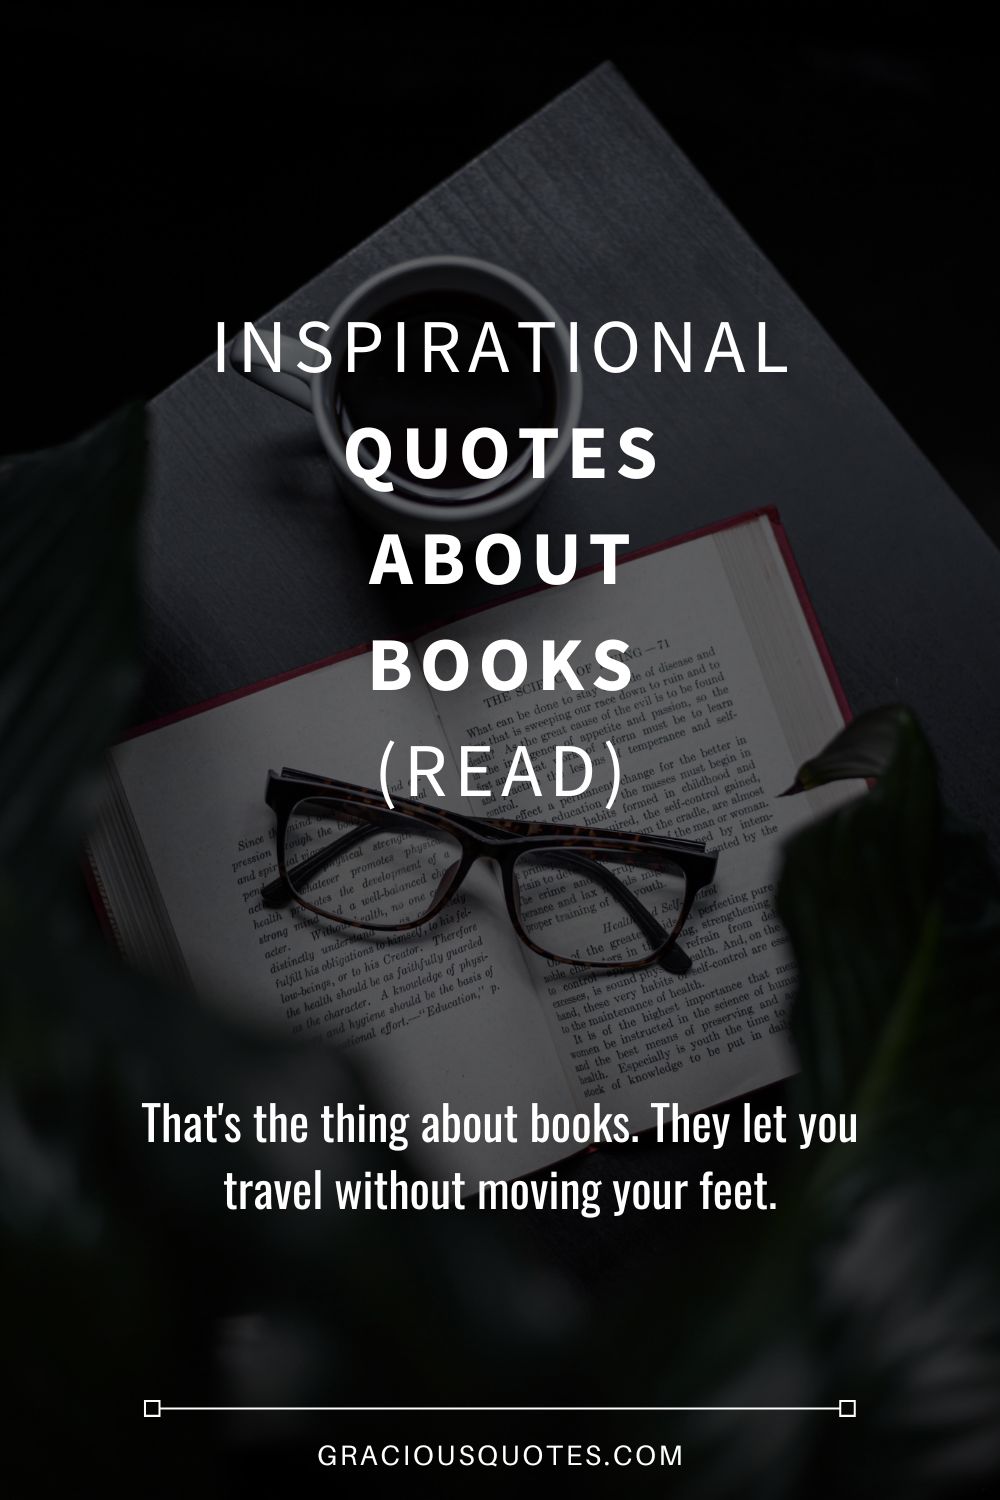 Inspirational Quotes About Books (READ) - Gracious Quotes